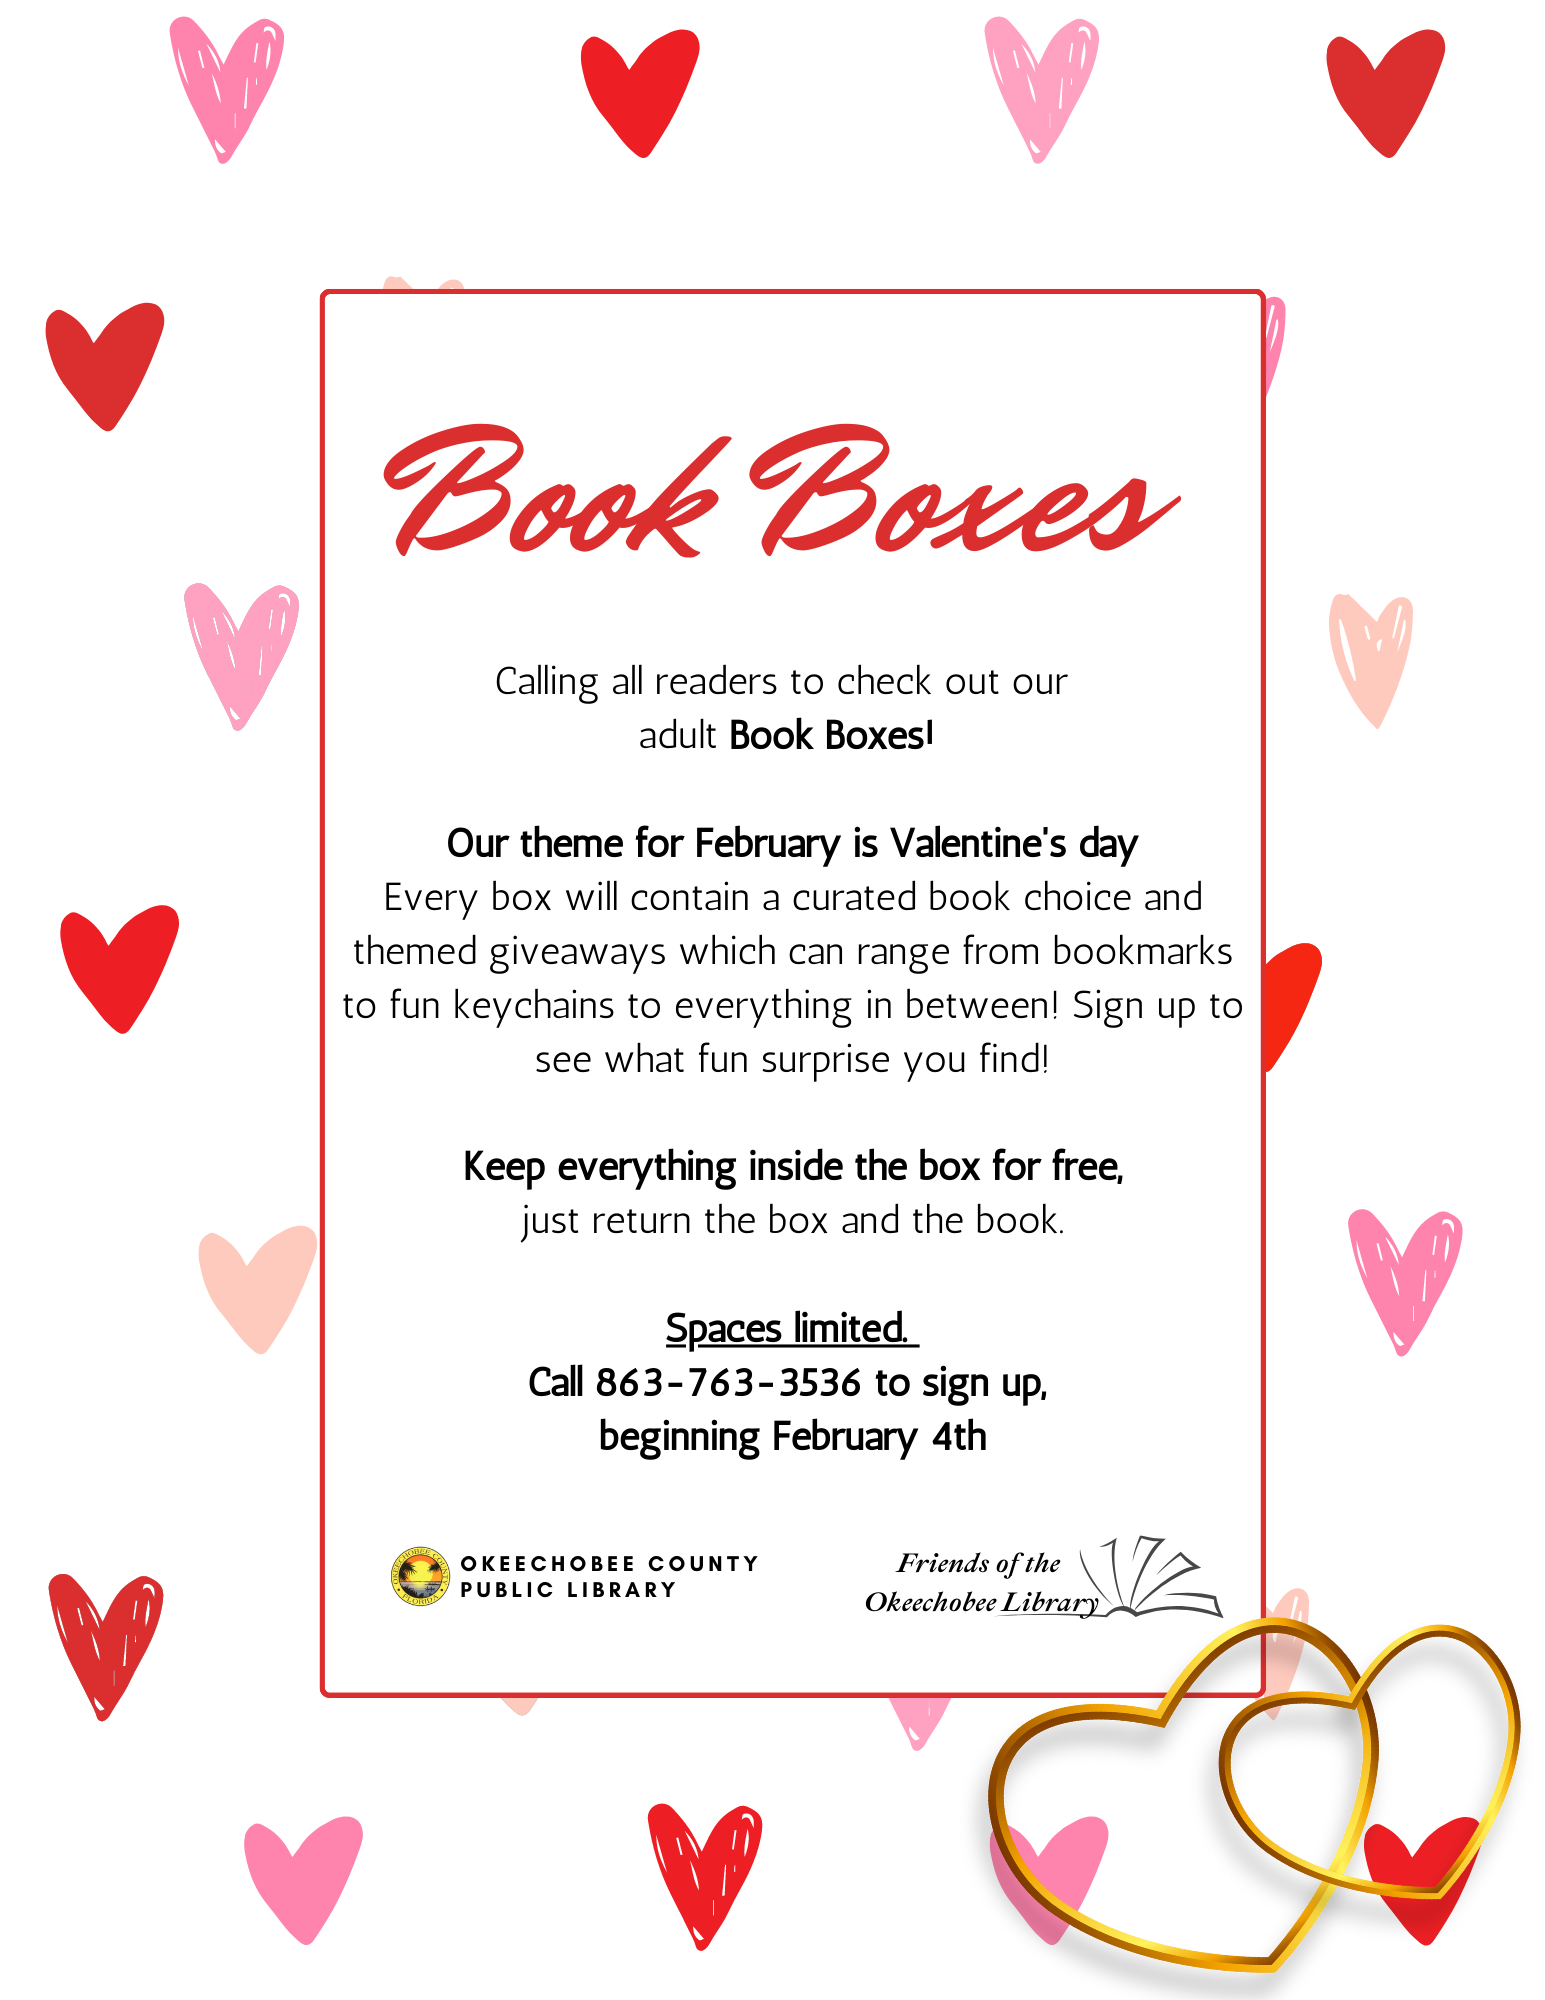 February Book Boxes! Every box will contain a curated book choice and themed giveaways which can range from bookmarks to fun keychains to everything in between! Sign up to see what fun surprise you find!